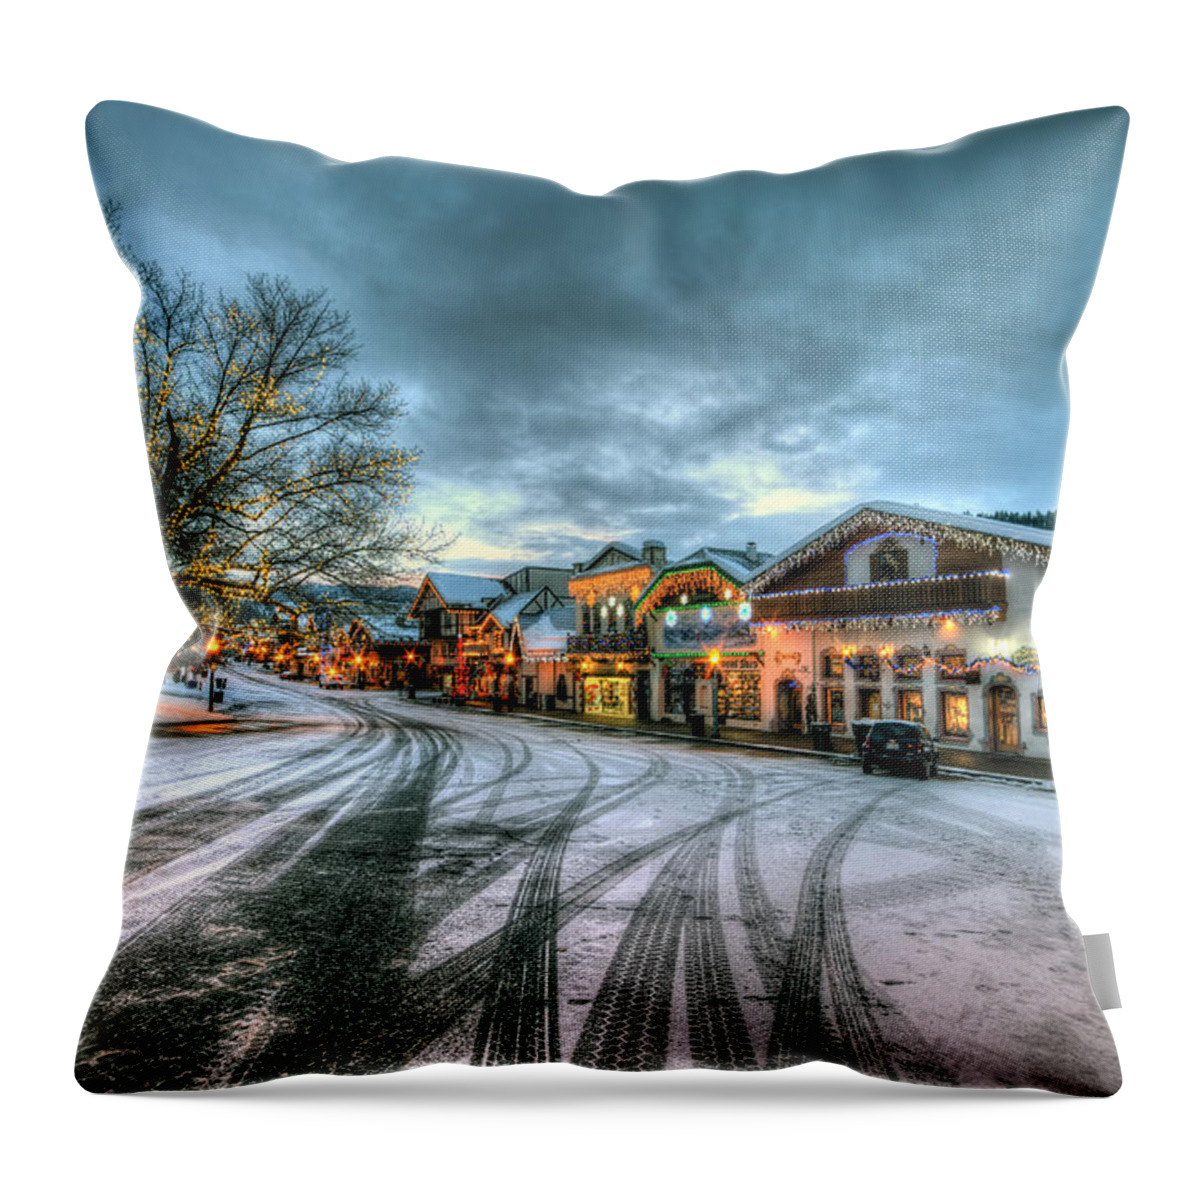 Hdr Throw Pillow featuring the photograph Christmas on Main Street by Brad Granger